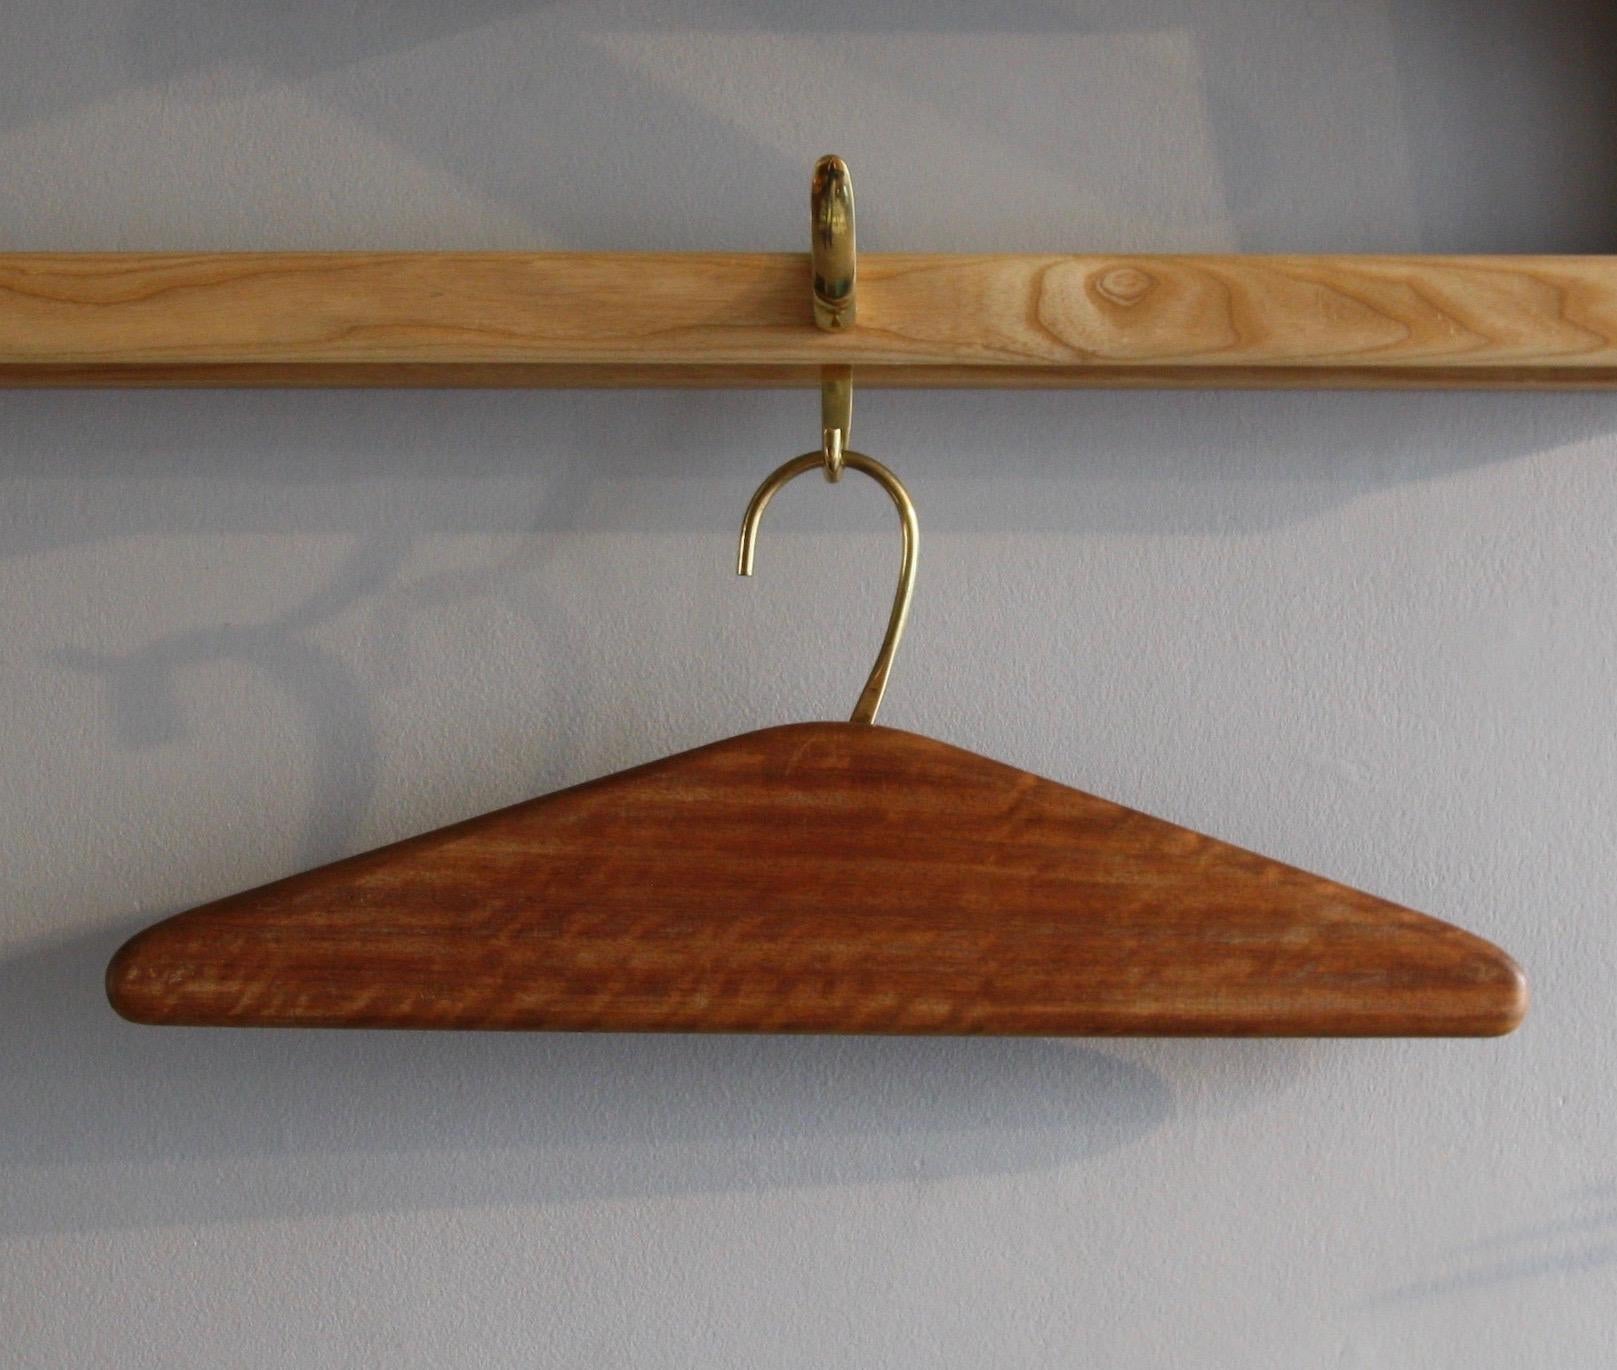 A vintage coat hanger or “kleiderbügel” designed and made by Carl Auböck II, Vienna, circa 1950. The hanger is model number 4650 in the Werkstätte Carl Auböck catalogue and was made to order as a solid triangle, as we see here, or with a slit cutout